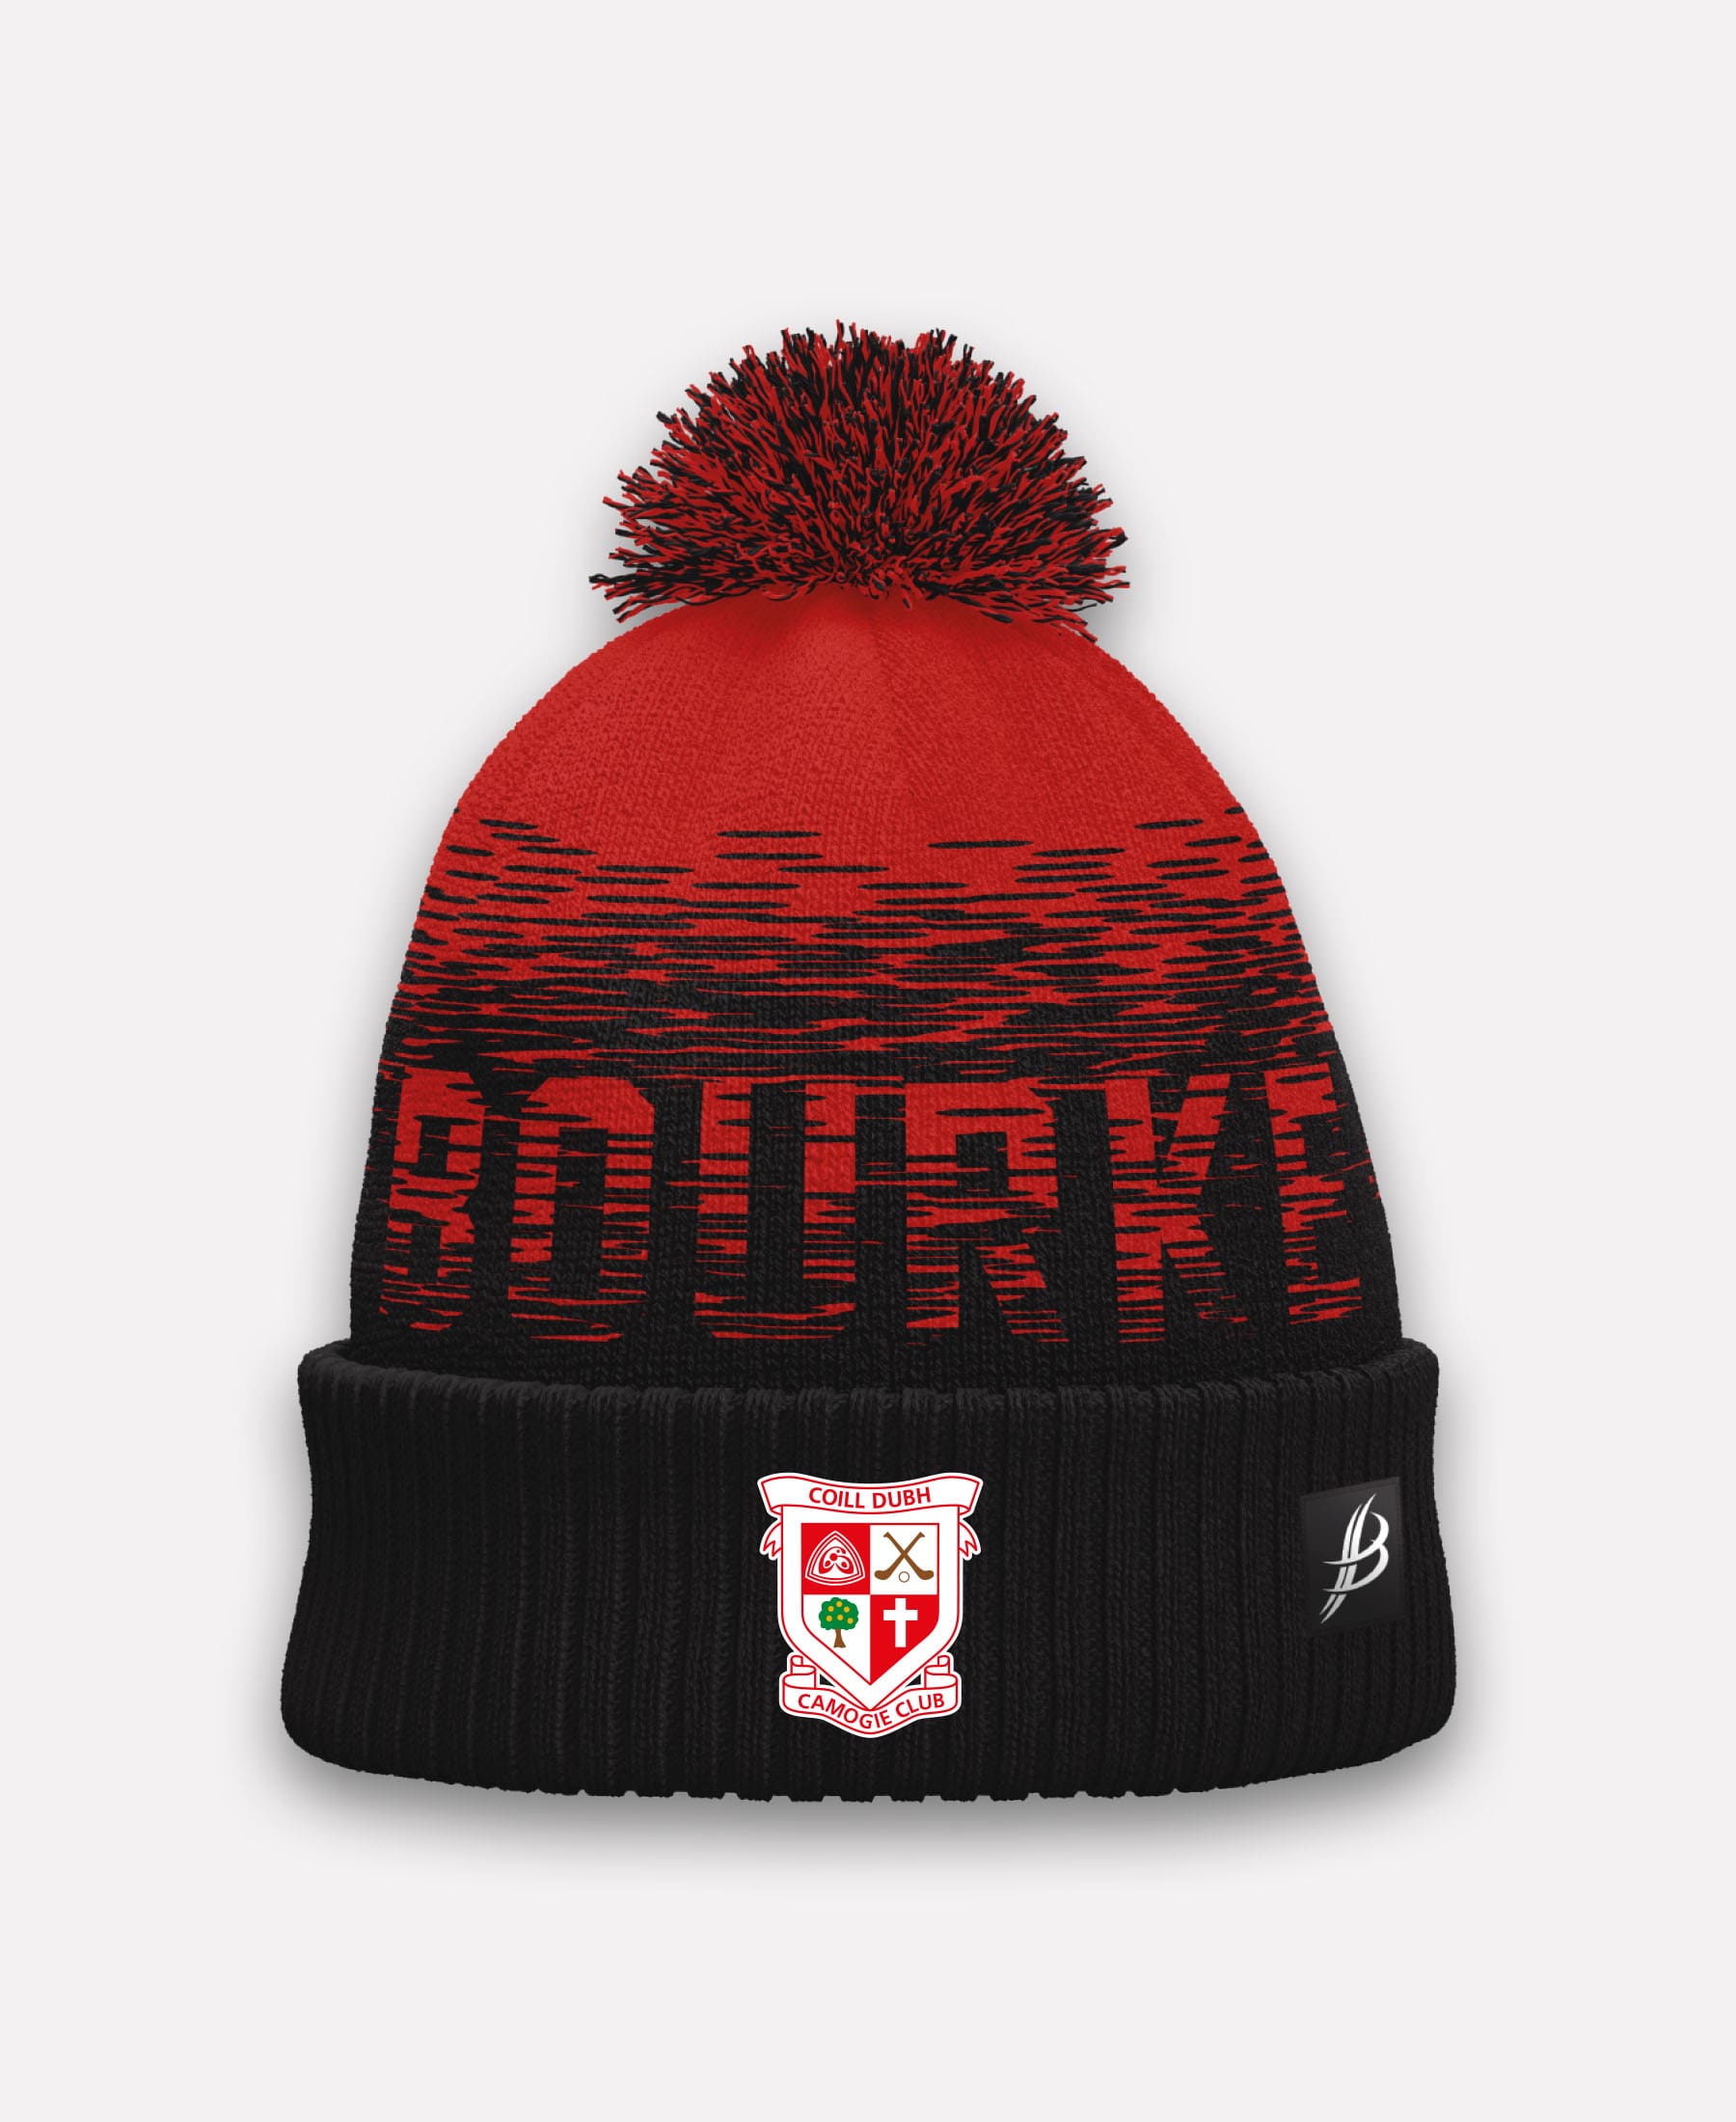 Coill Dubh Camogie TACA Bobble Hat